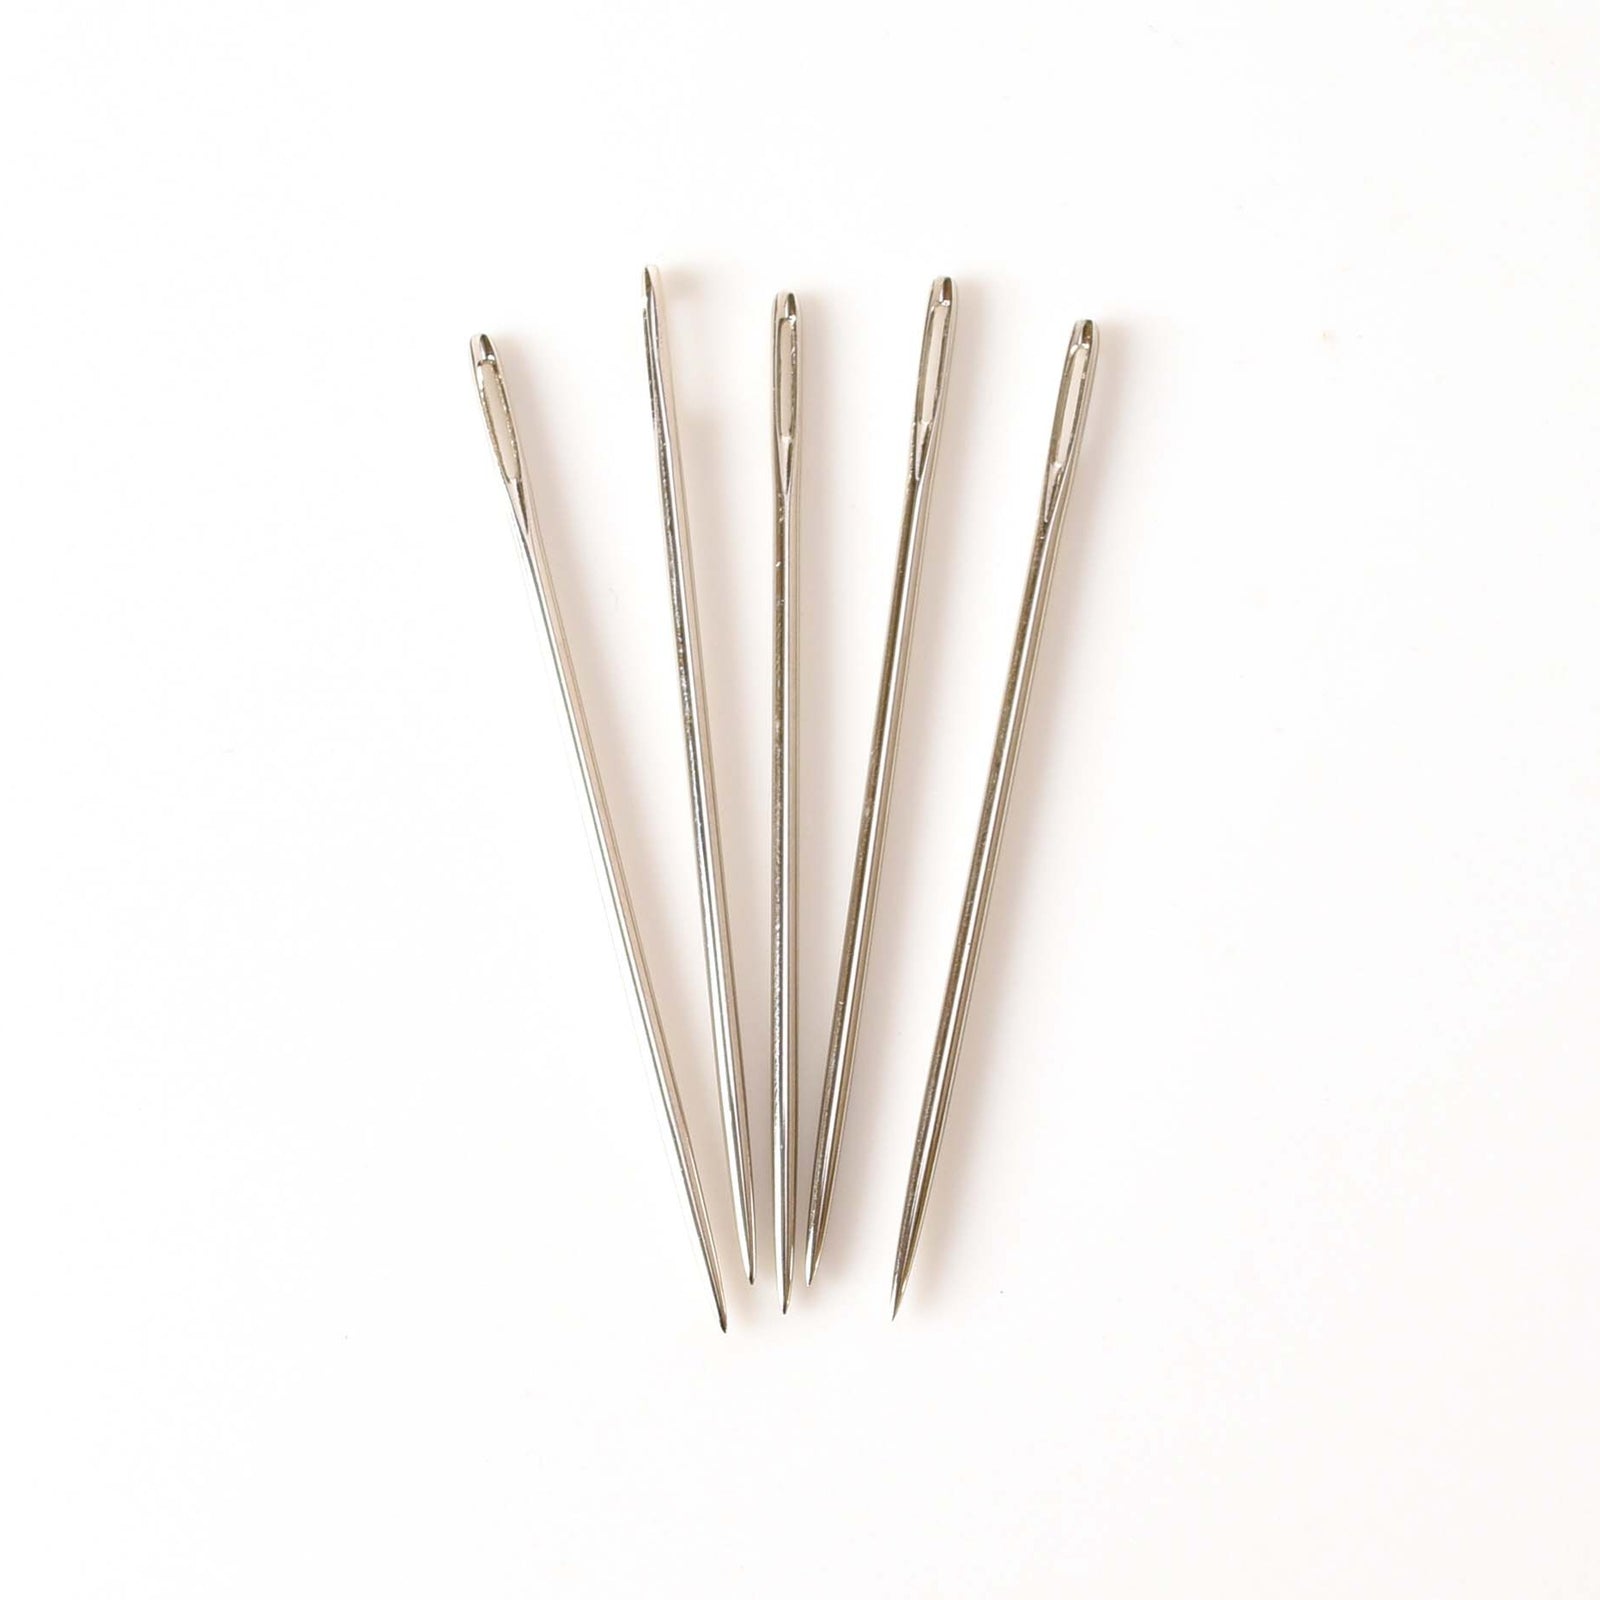 METAL TAPESTRY NEEDLE - 3 PIECES